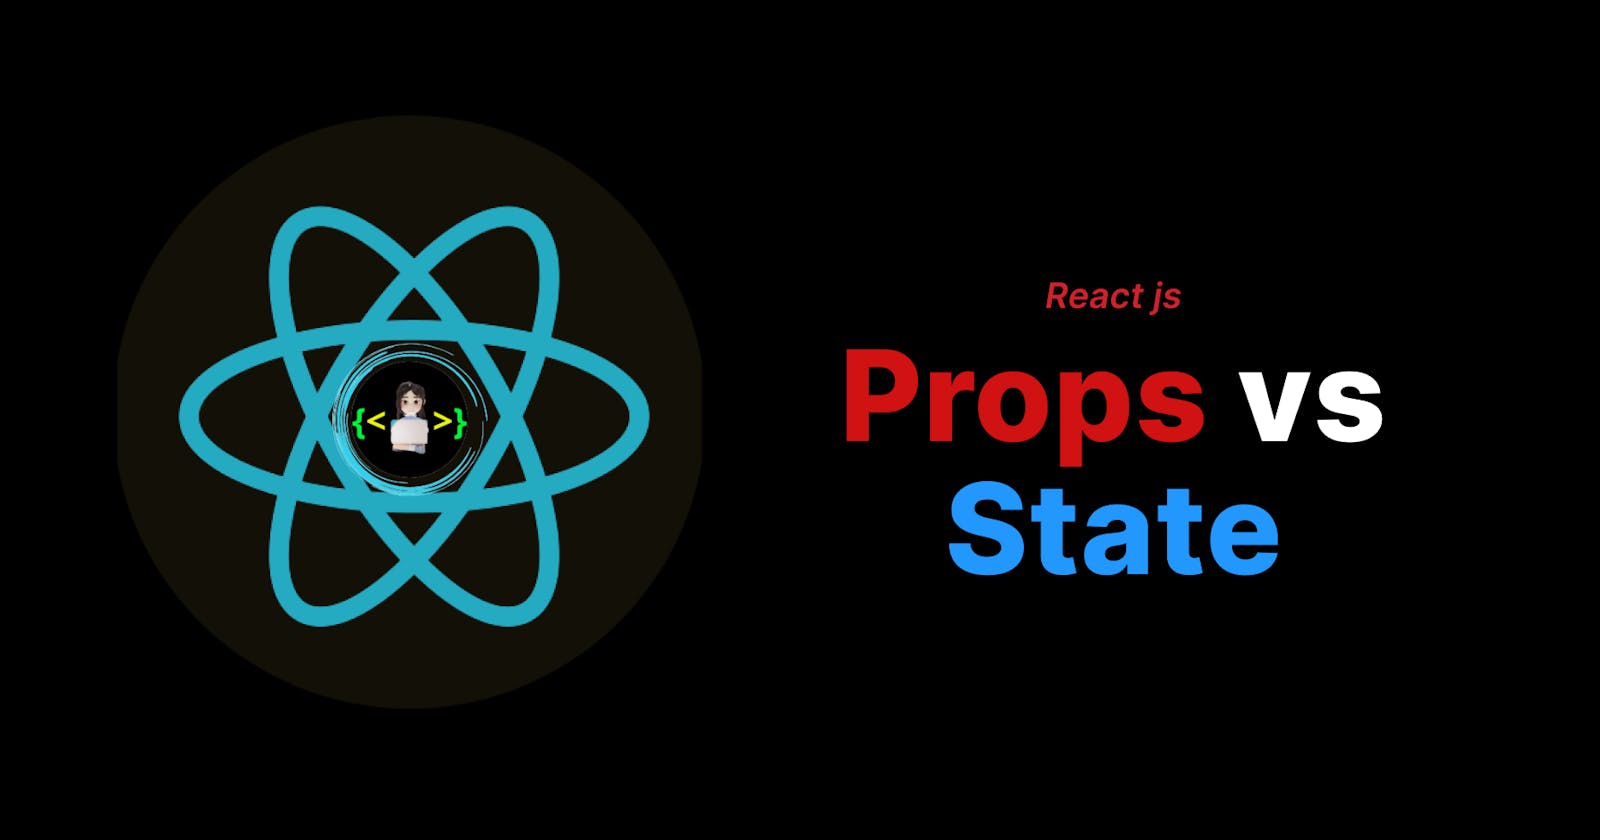 Learn the differences between props and state